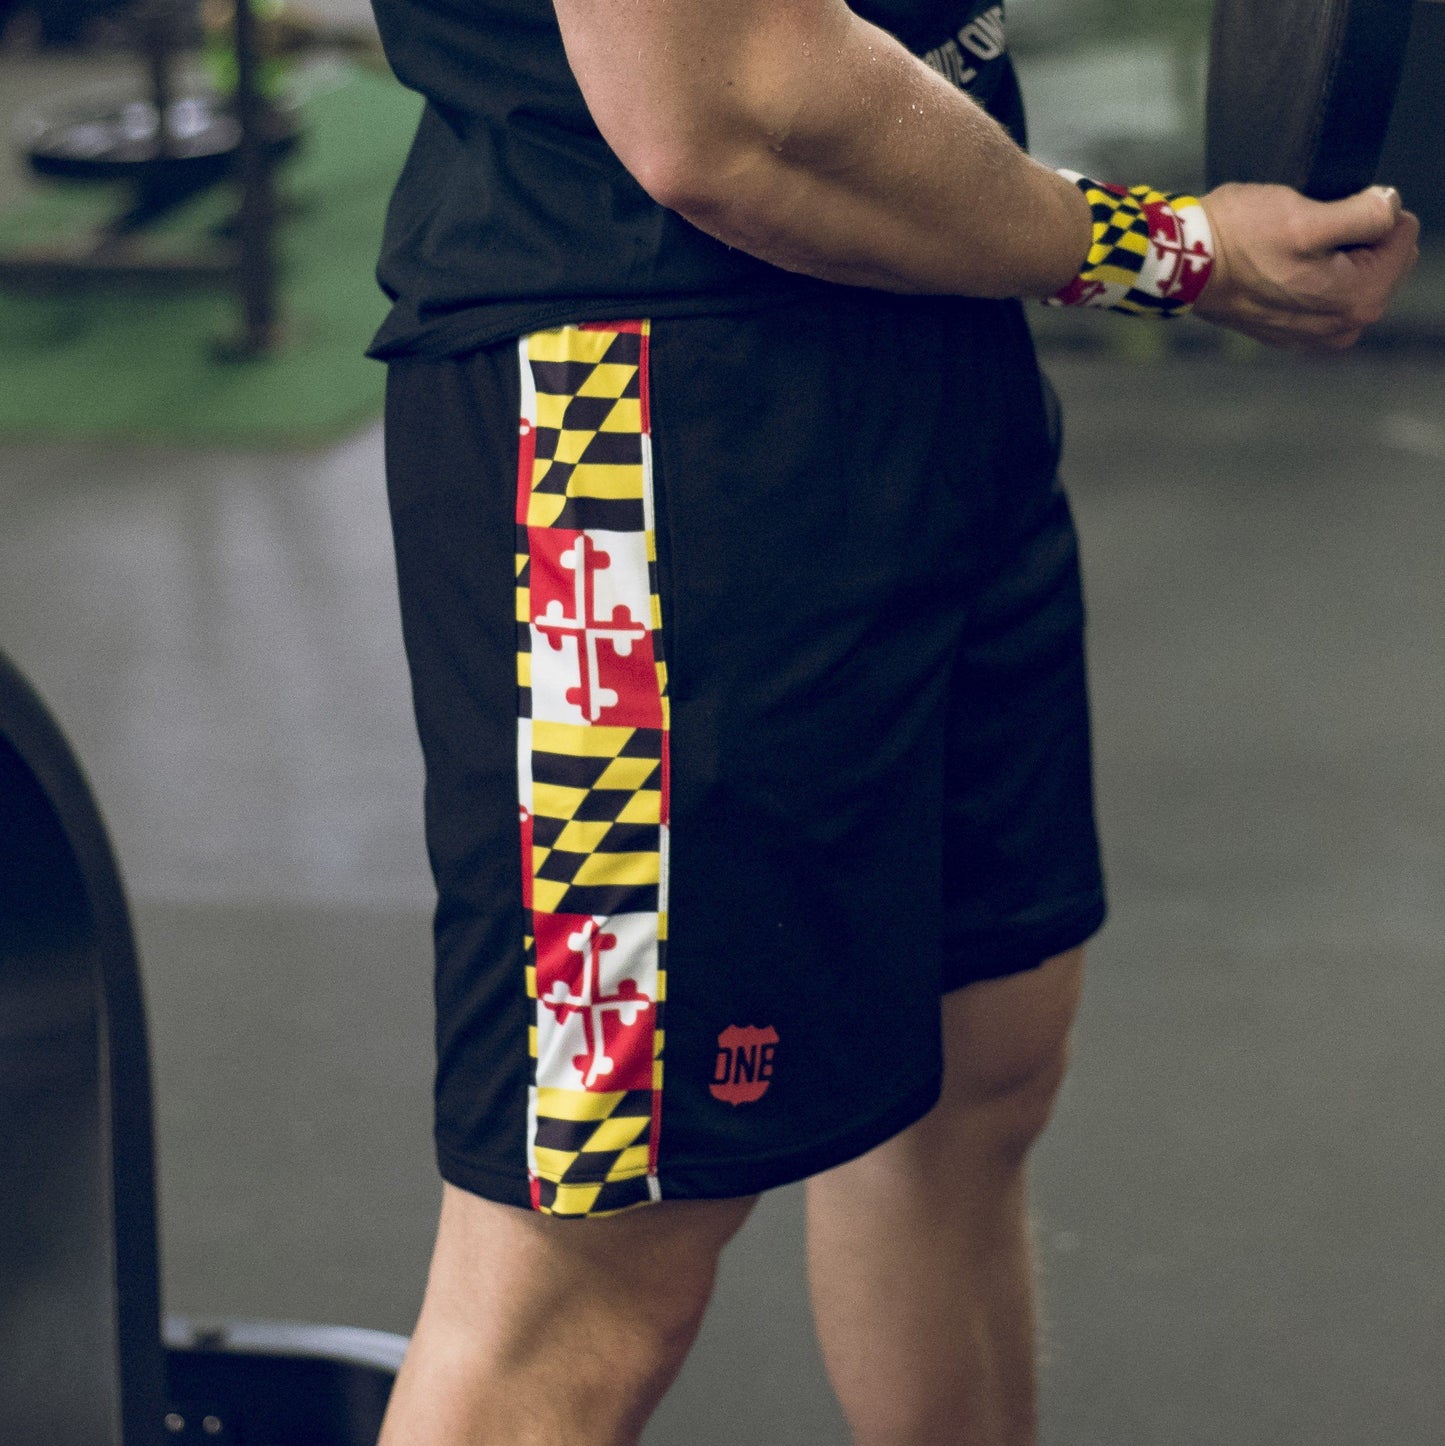 Running (Men) Route One (Black) Maryland Shorts Apparel | Flag /